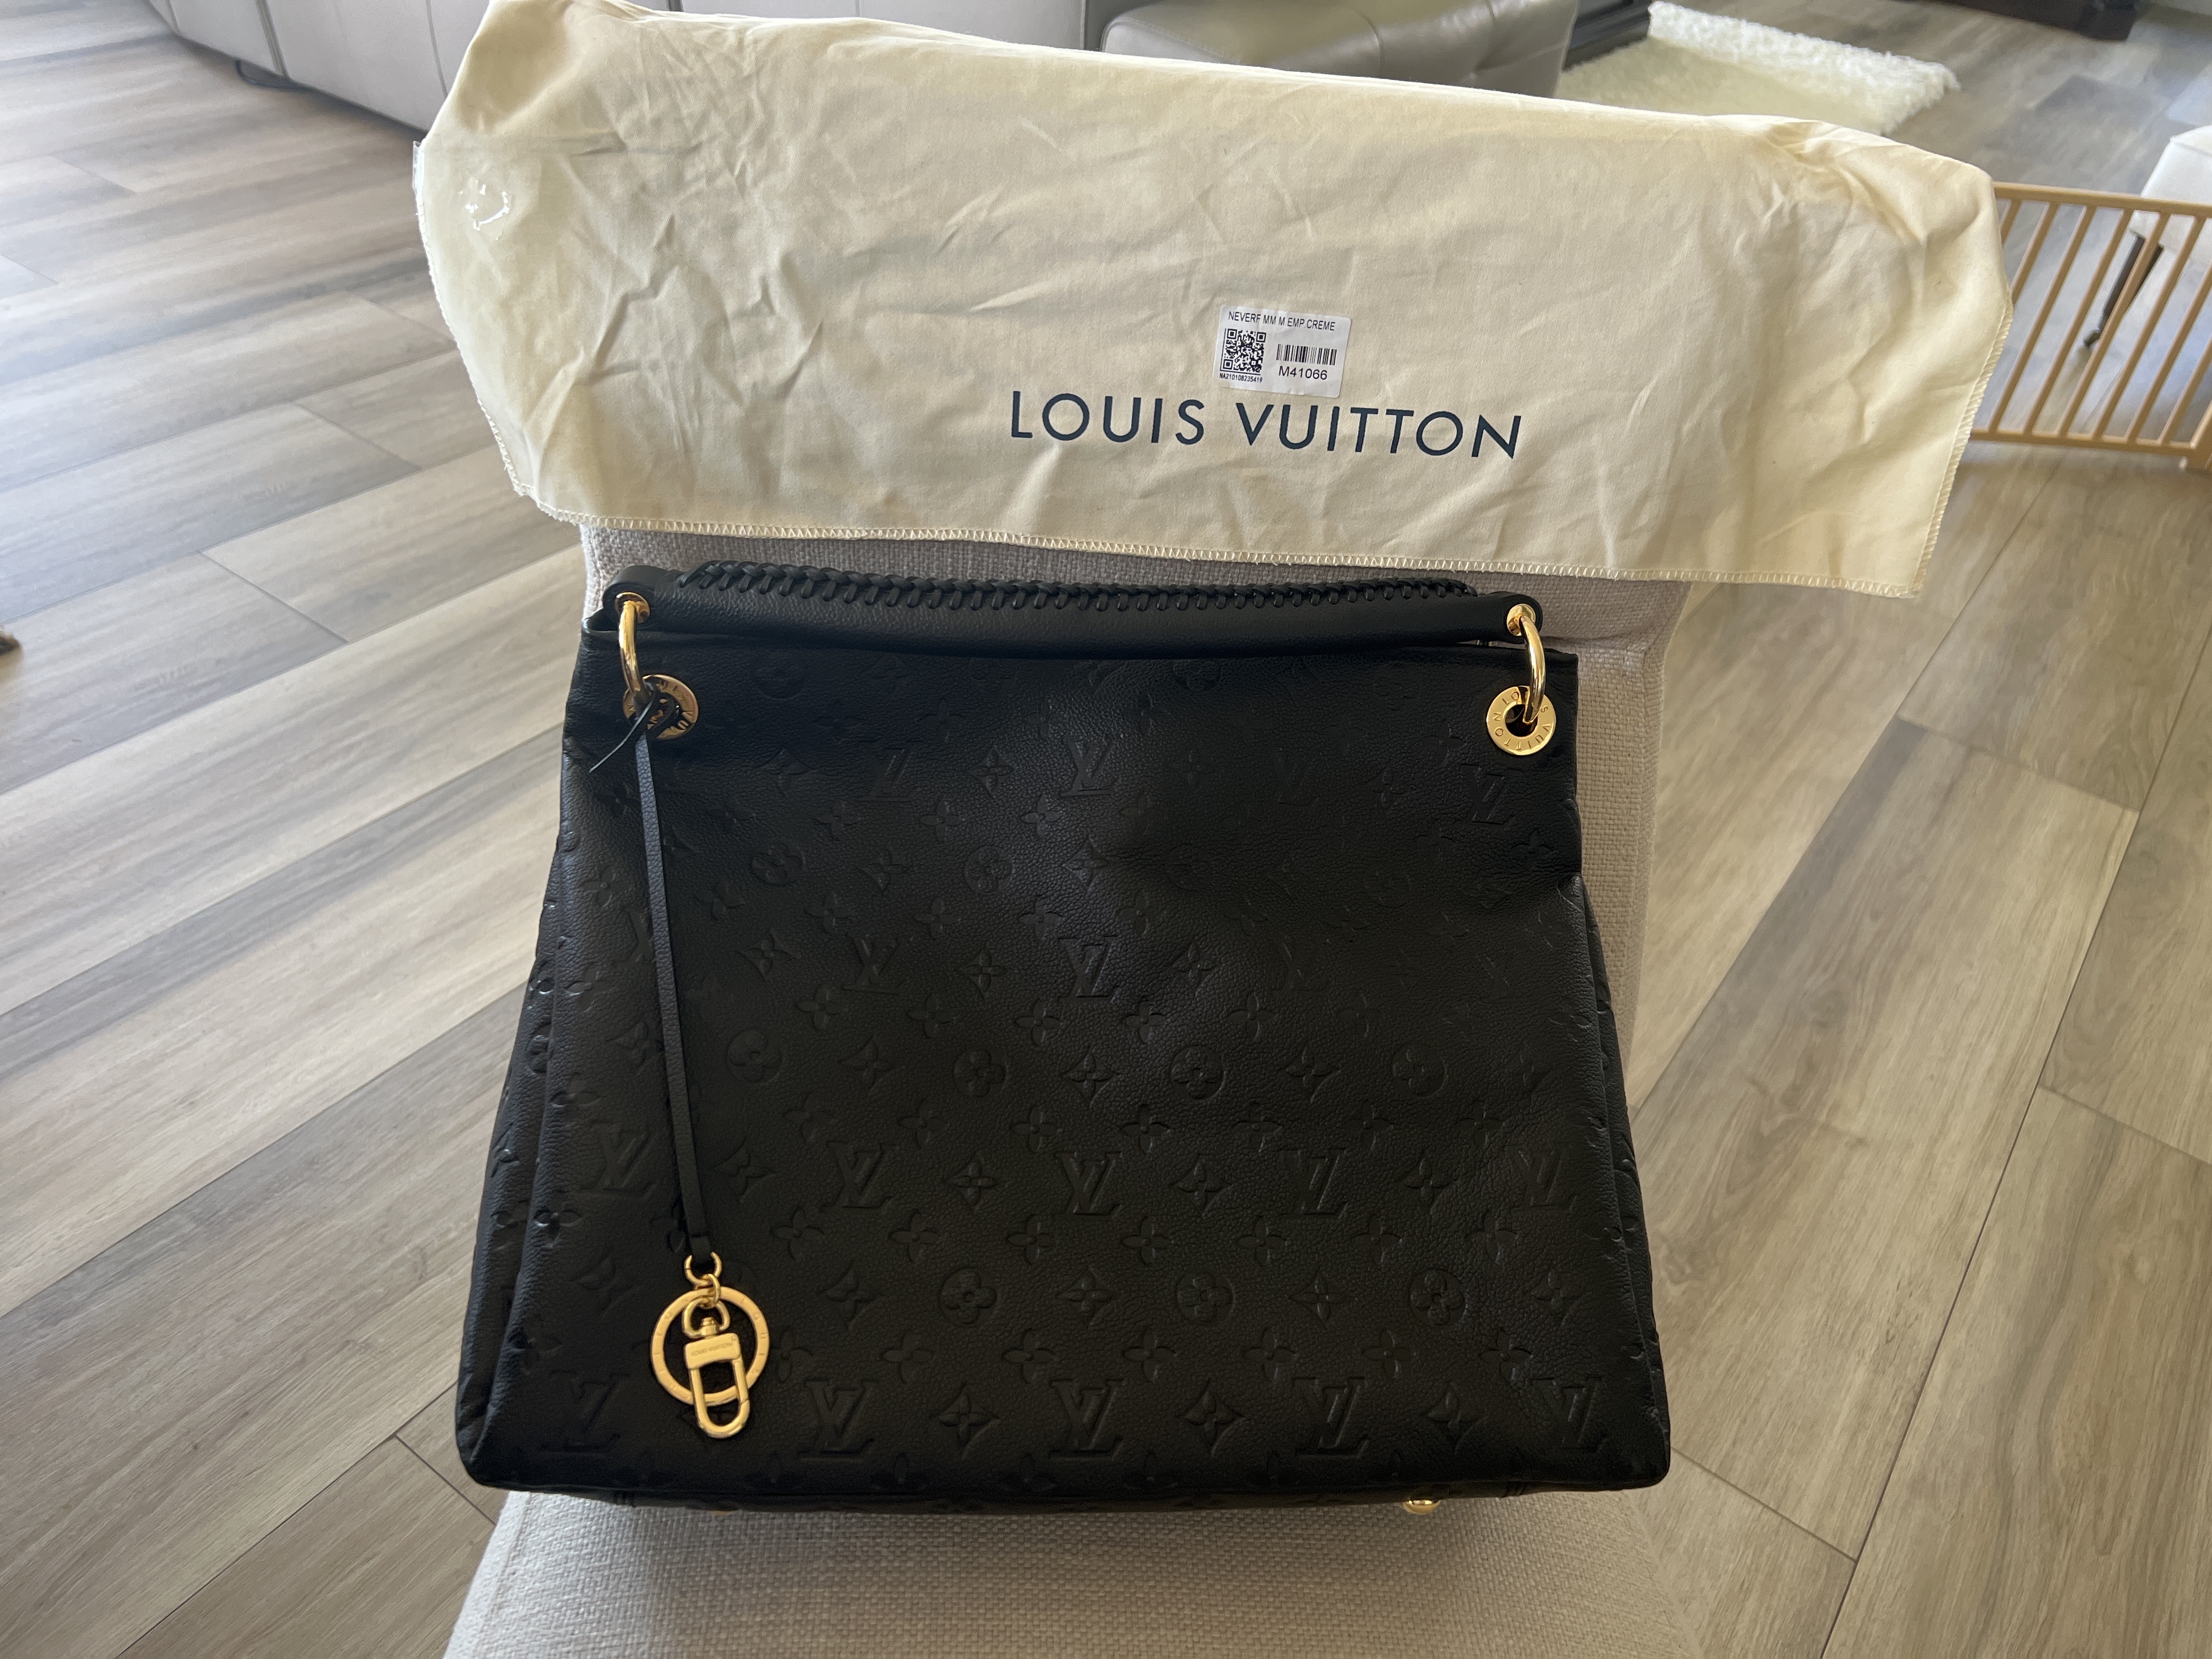 Louis Vuitton jacket from Trusted seller Ceci,Top Grade quality 1:1  replica.Before shipment we will send QC,if not satisfied,you can  unconditional refund or replace.WhatsApp: +(86)13719385701，Welcome to check  our satisfactory customer reviews anyt